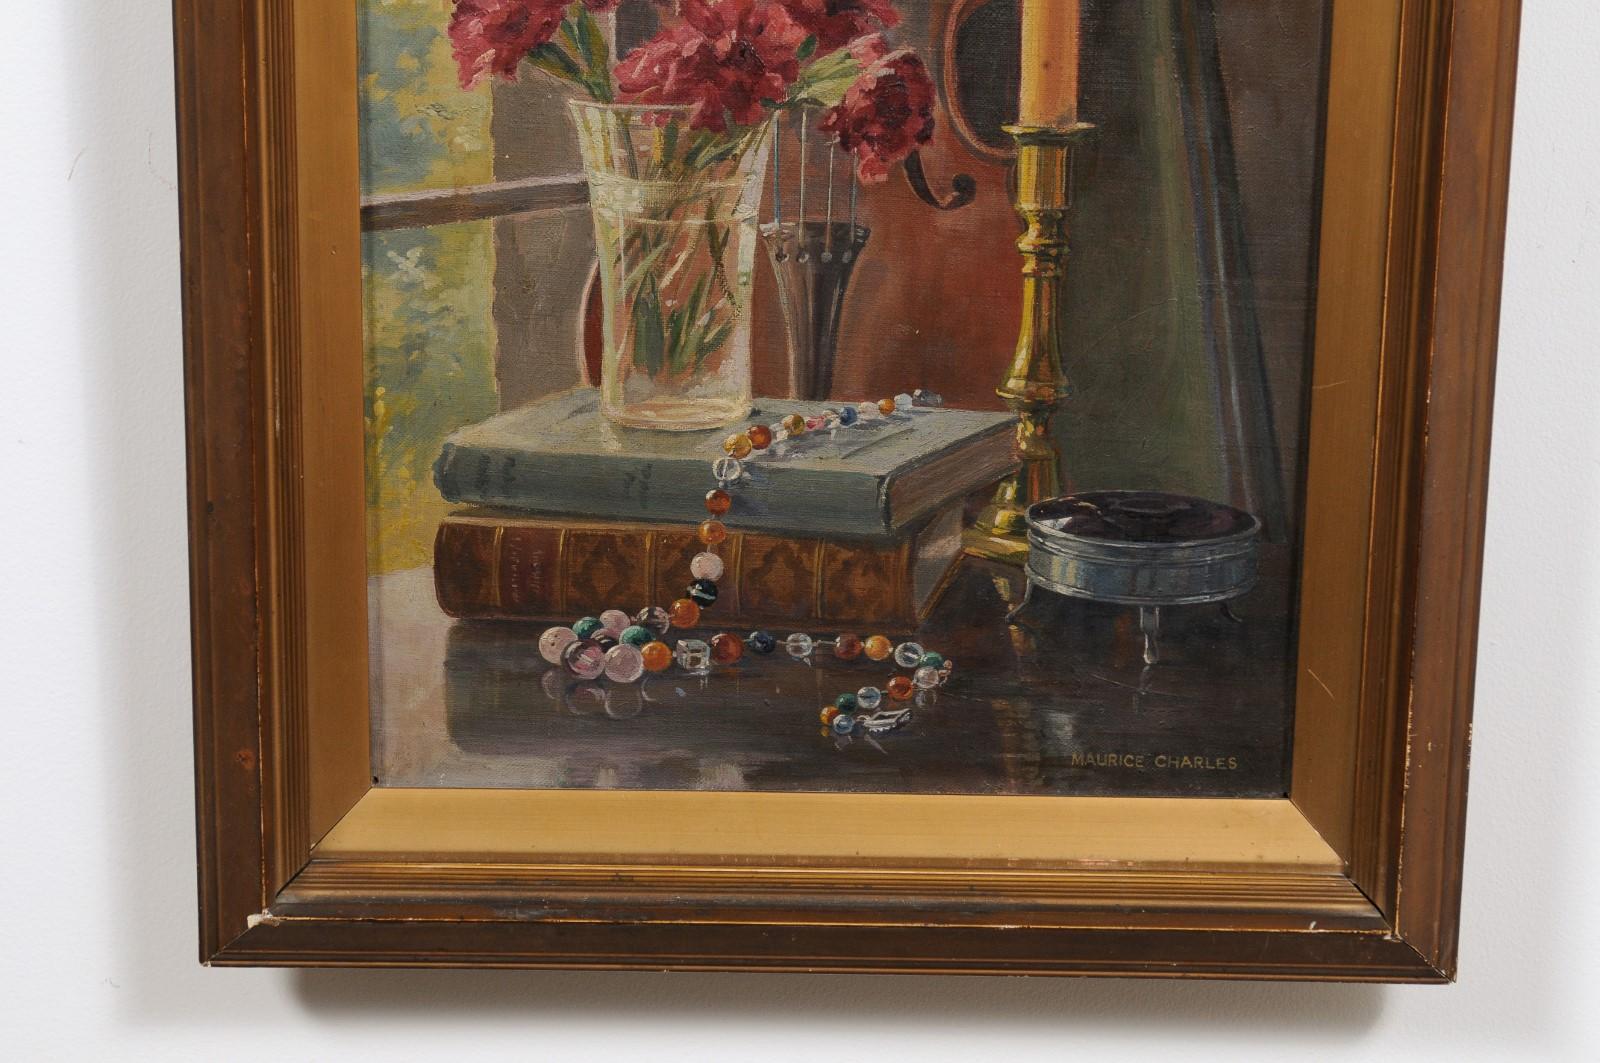 English 19th Century Framed Still-Life Violin Painting Signed Maurice Charles For Sale 2